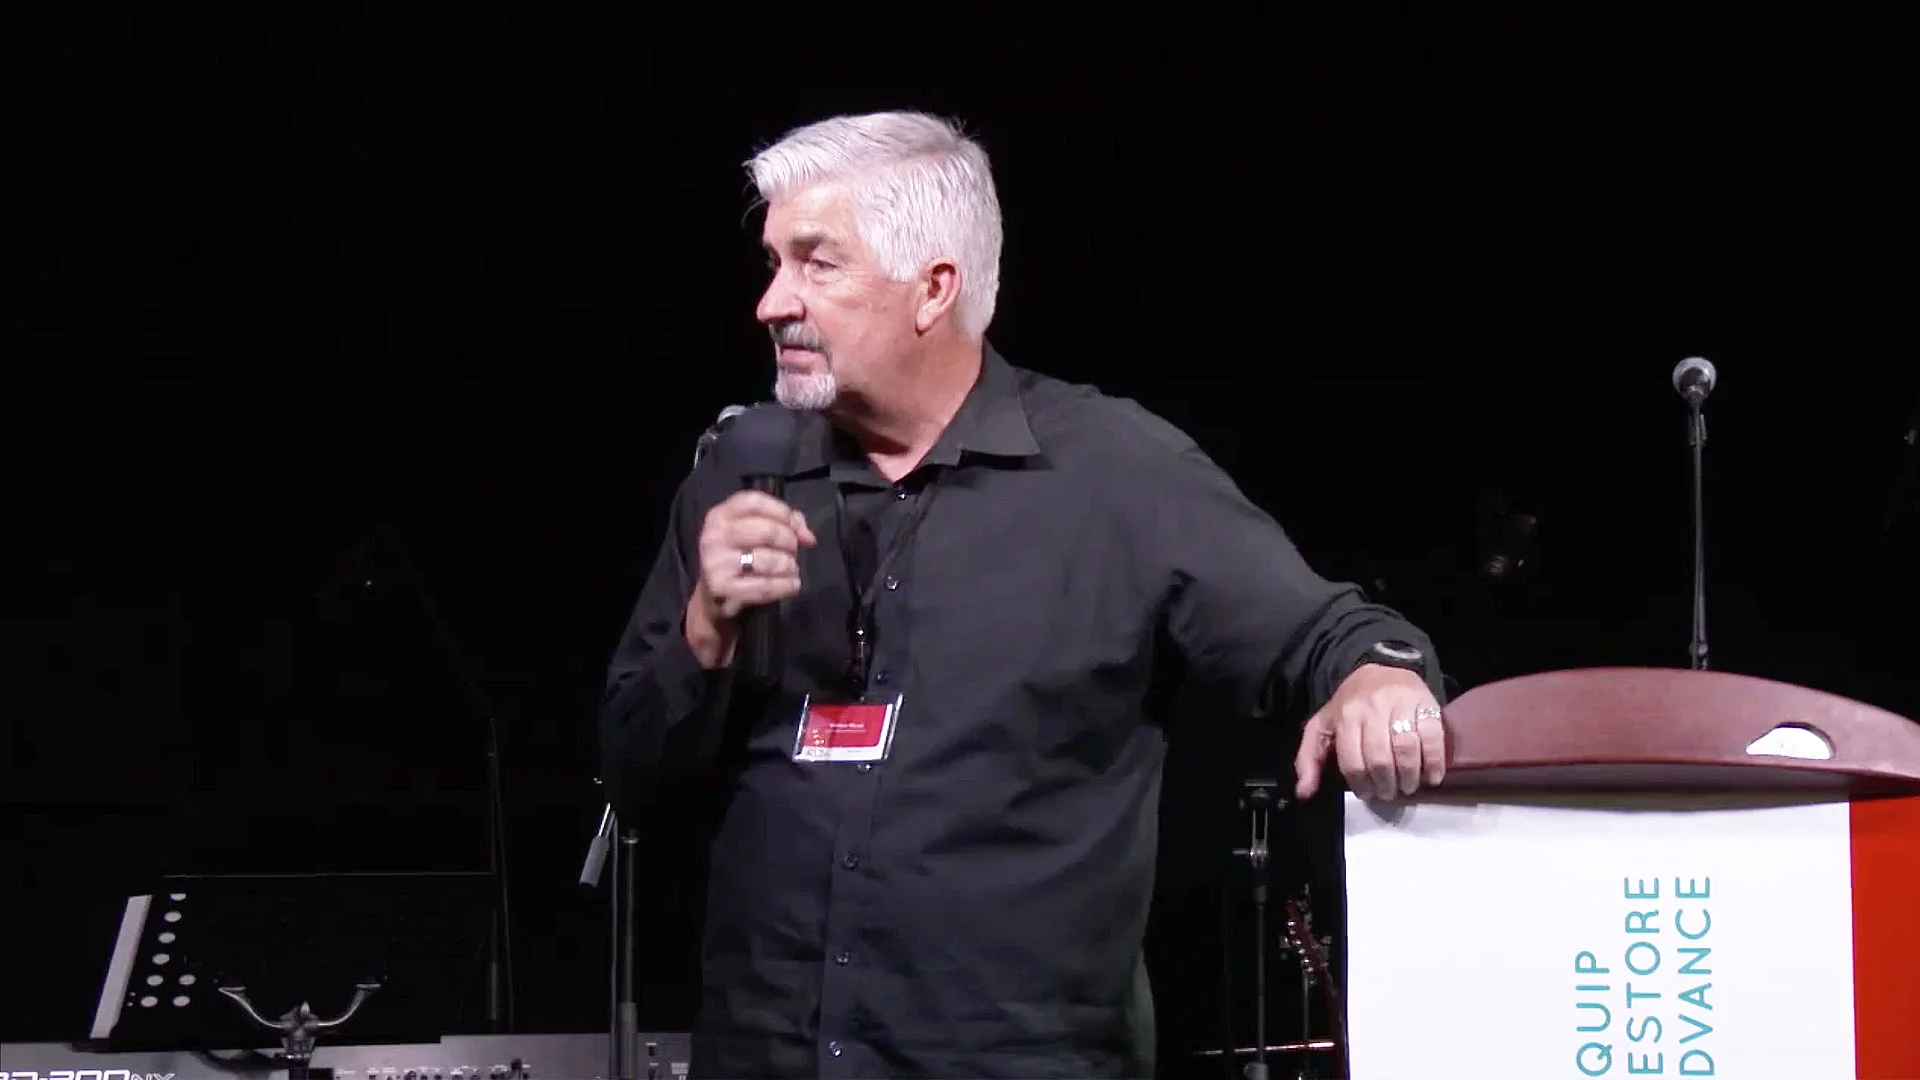 Video image of 2014 Four12 RSA Conference session 'To Raise Sons and Daughters'